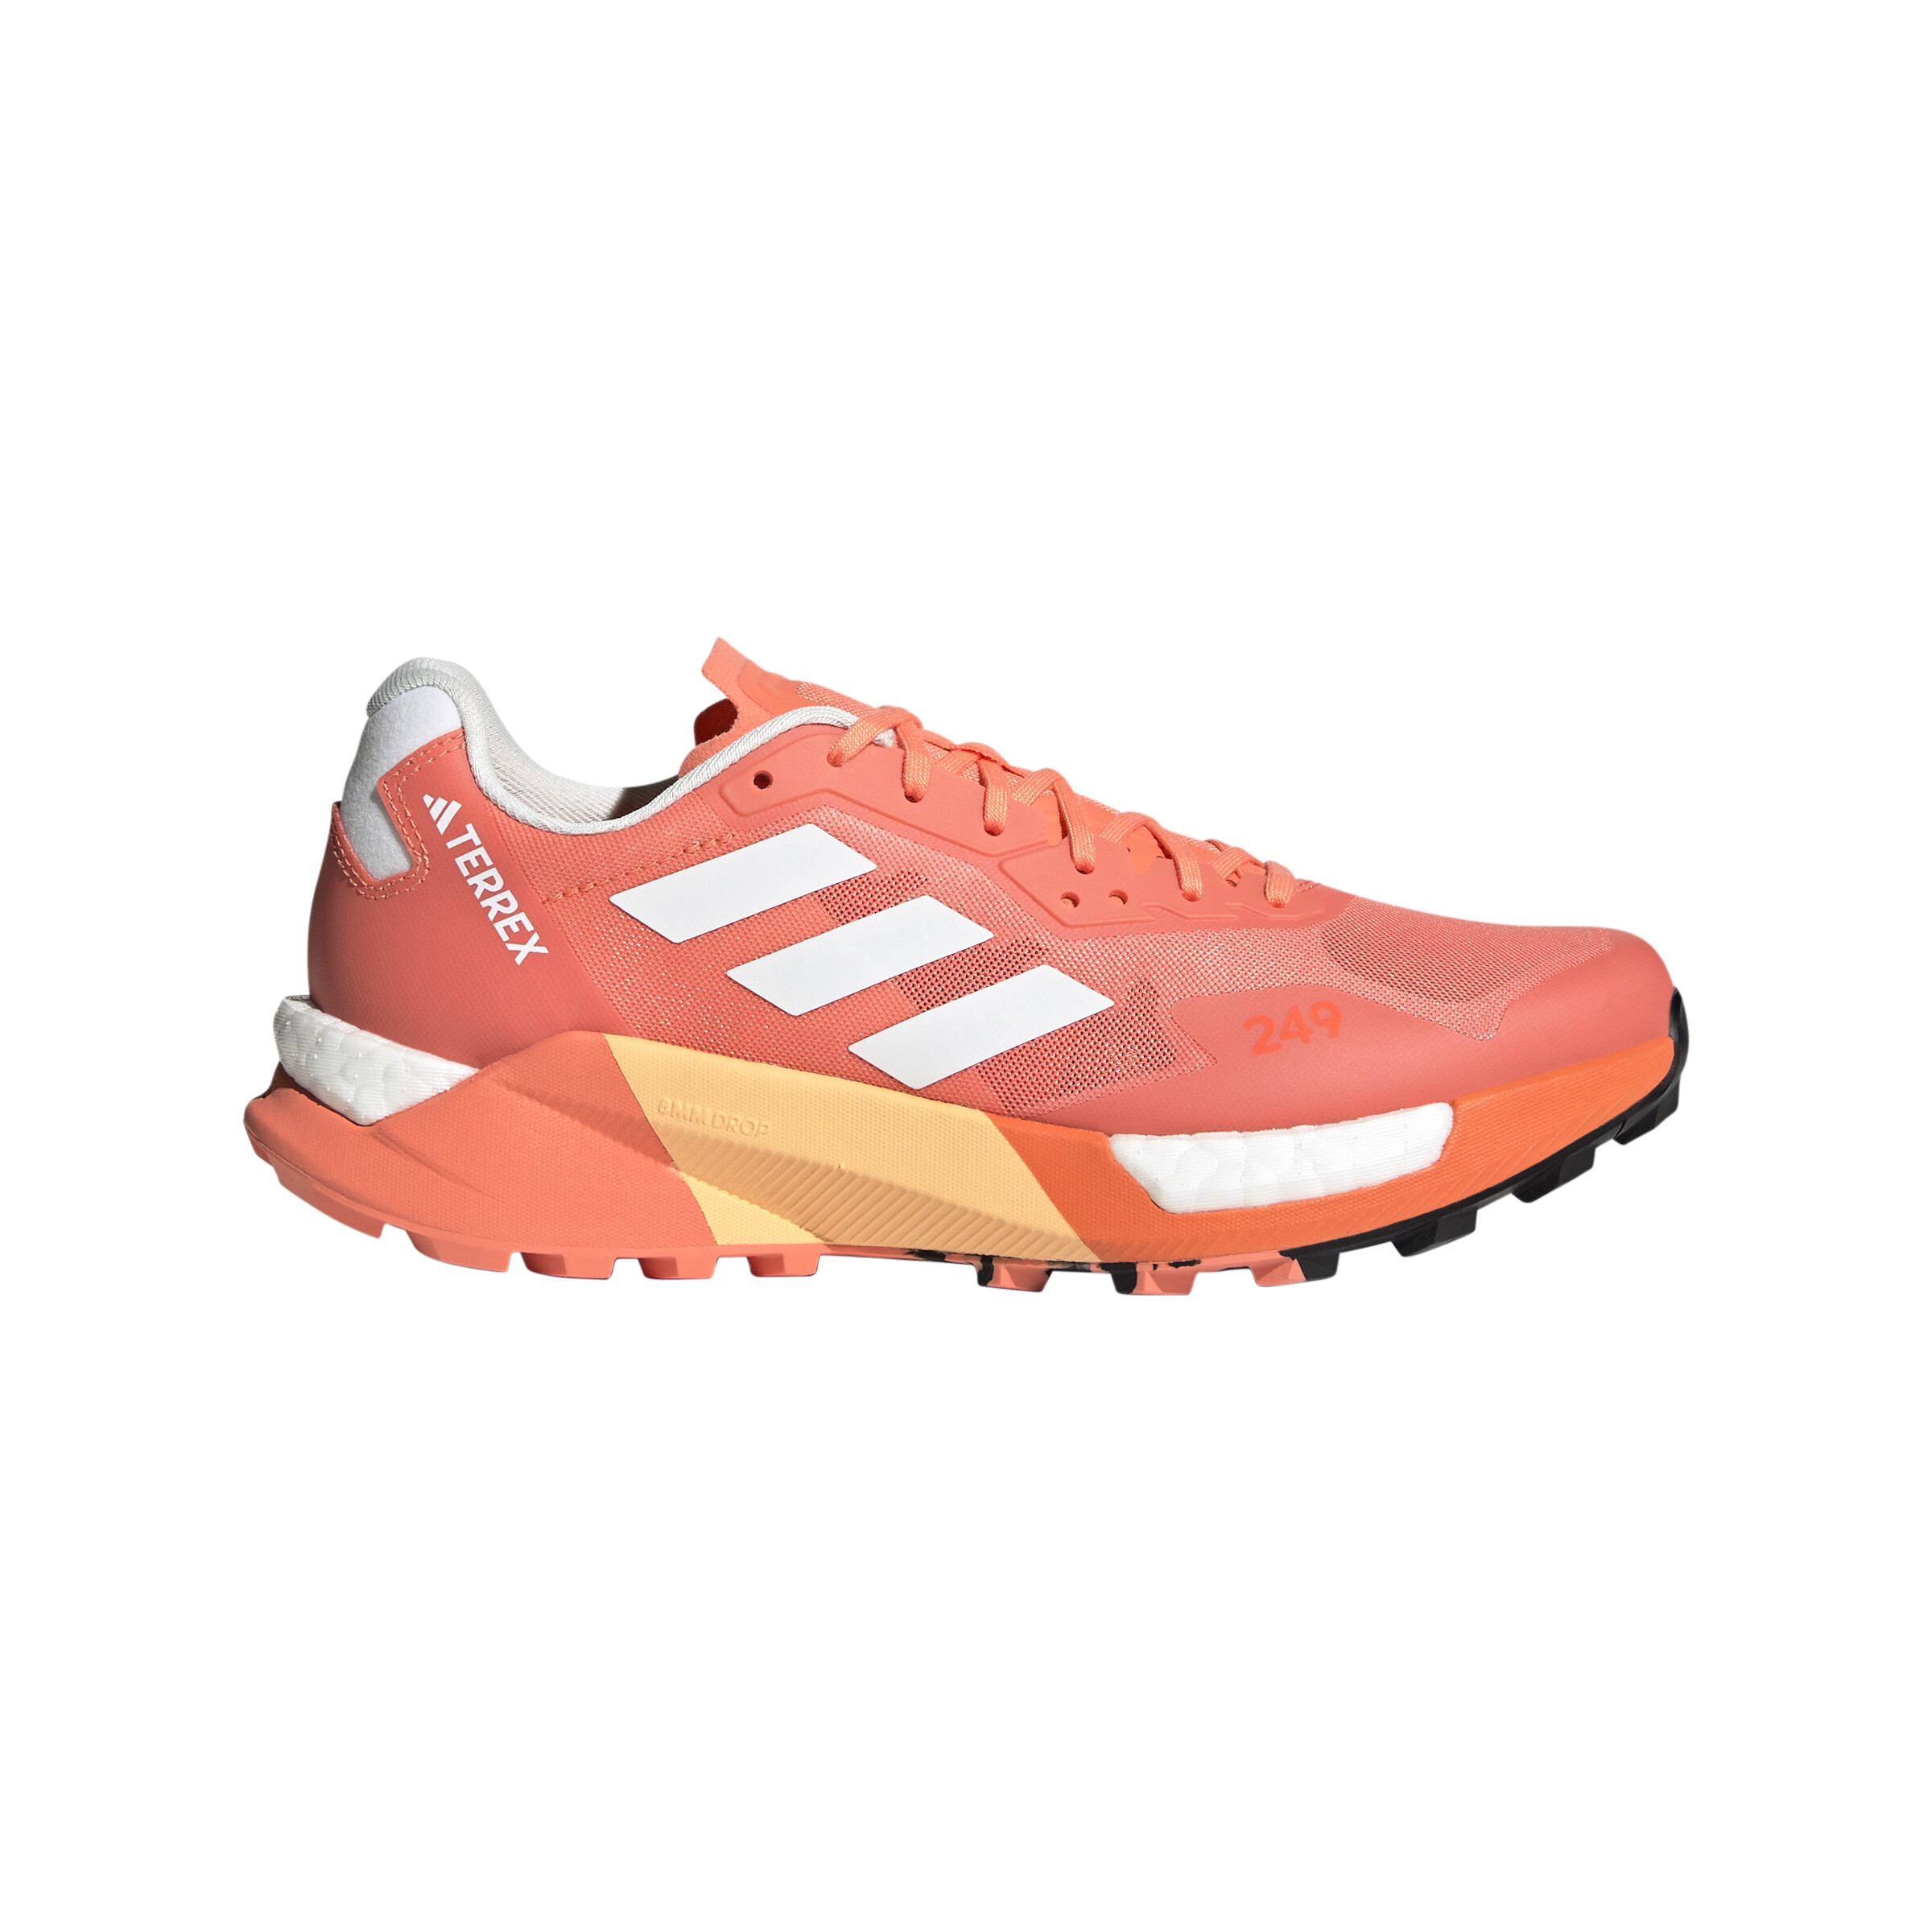 Women's running shoes adidas Terrex AGRAVIC ULTR CORFUS/CRYWHT/IMPORA EUR 40 2/3 akció-Adidas 1